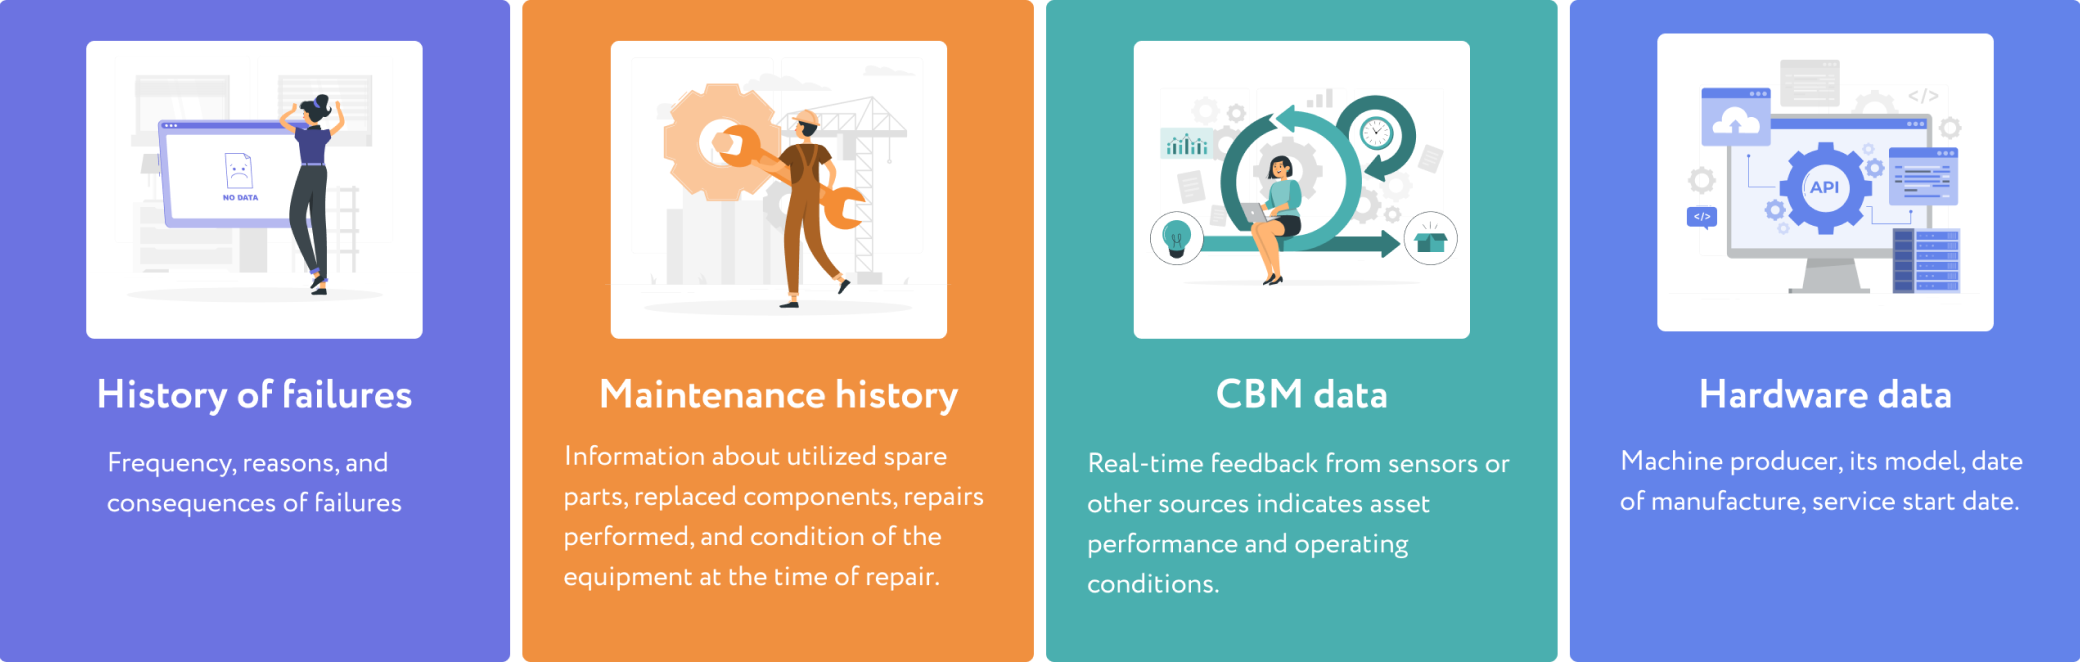 Types of data required for implementing predictive maintenance.